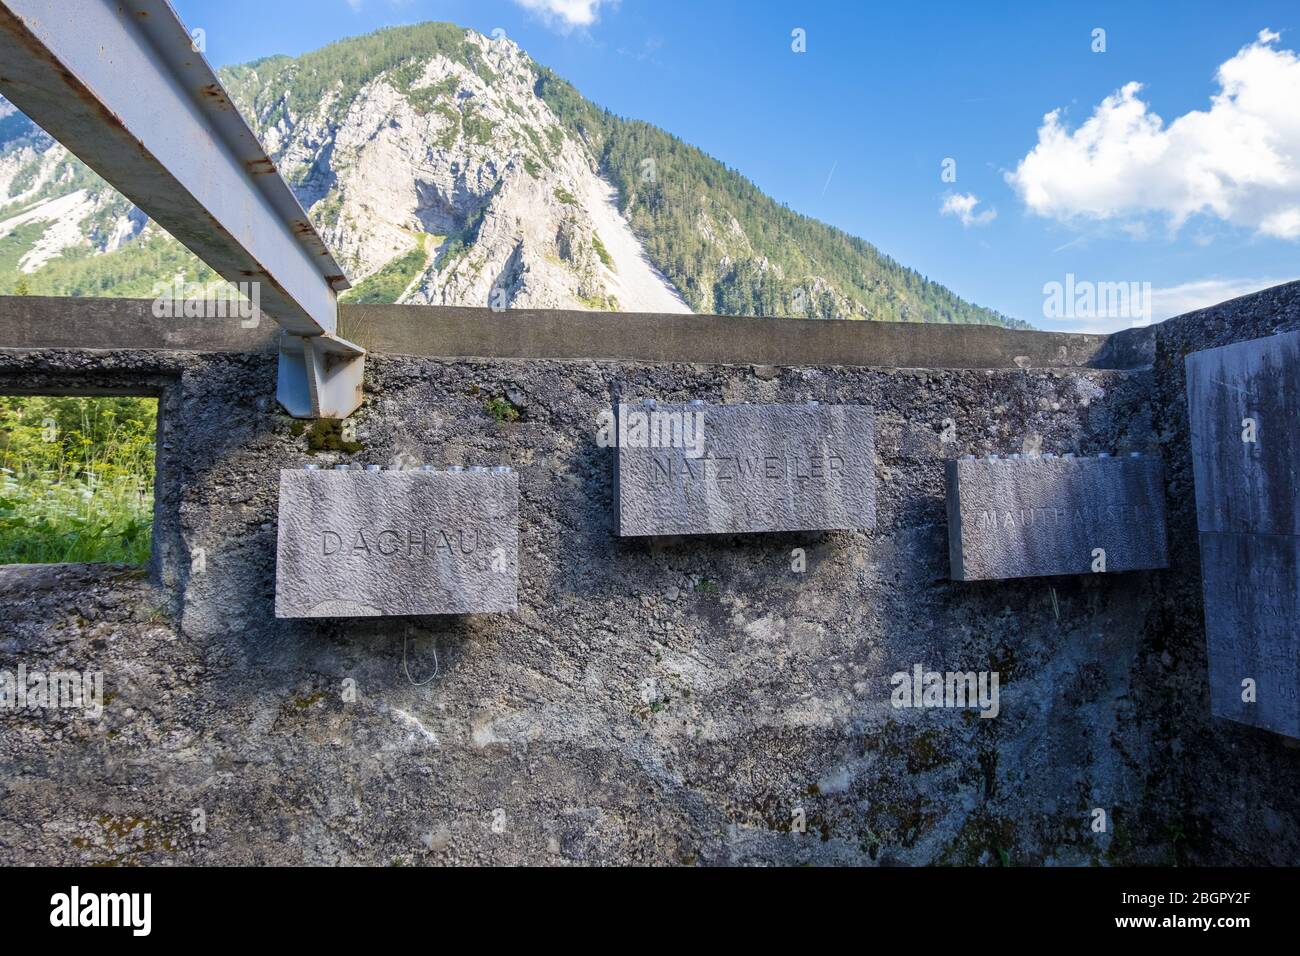 Ljubelj, Slovenia - August 09, 2019: Remains of Camp Loibl in Slovenia. Memorial Plaques with names of Concentration Camps. Memorial park Mauthausen Stock Photo